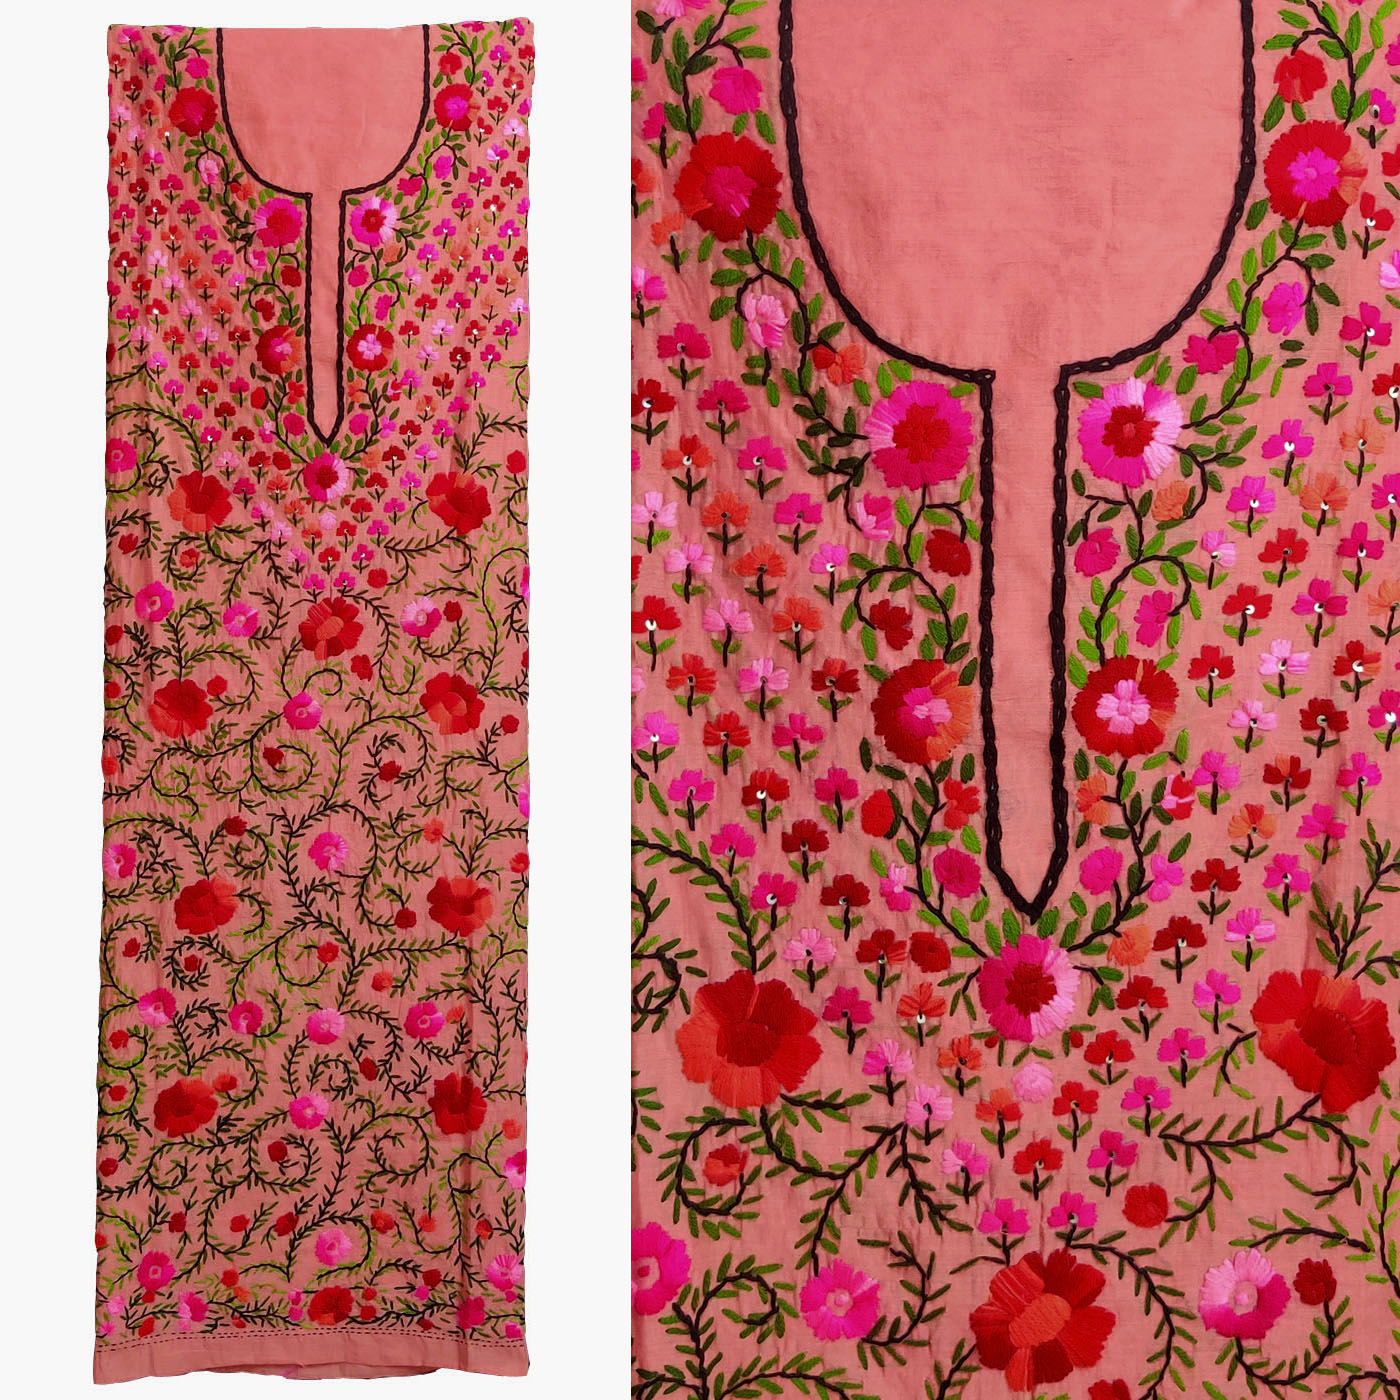 LIGHT CARROT RED CHANDERI SILK CUSTOM STITCHED HAND EMBROIDERED KURTI KURTA OR SALWAR KAMEEZ UP TO READY SIZE 54 (stitching included) LADIES DEN